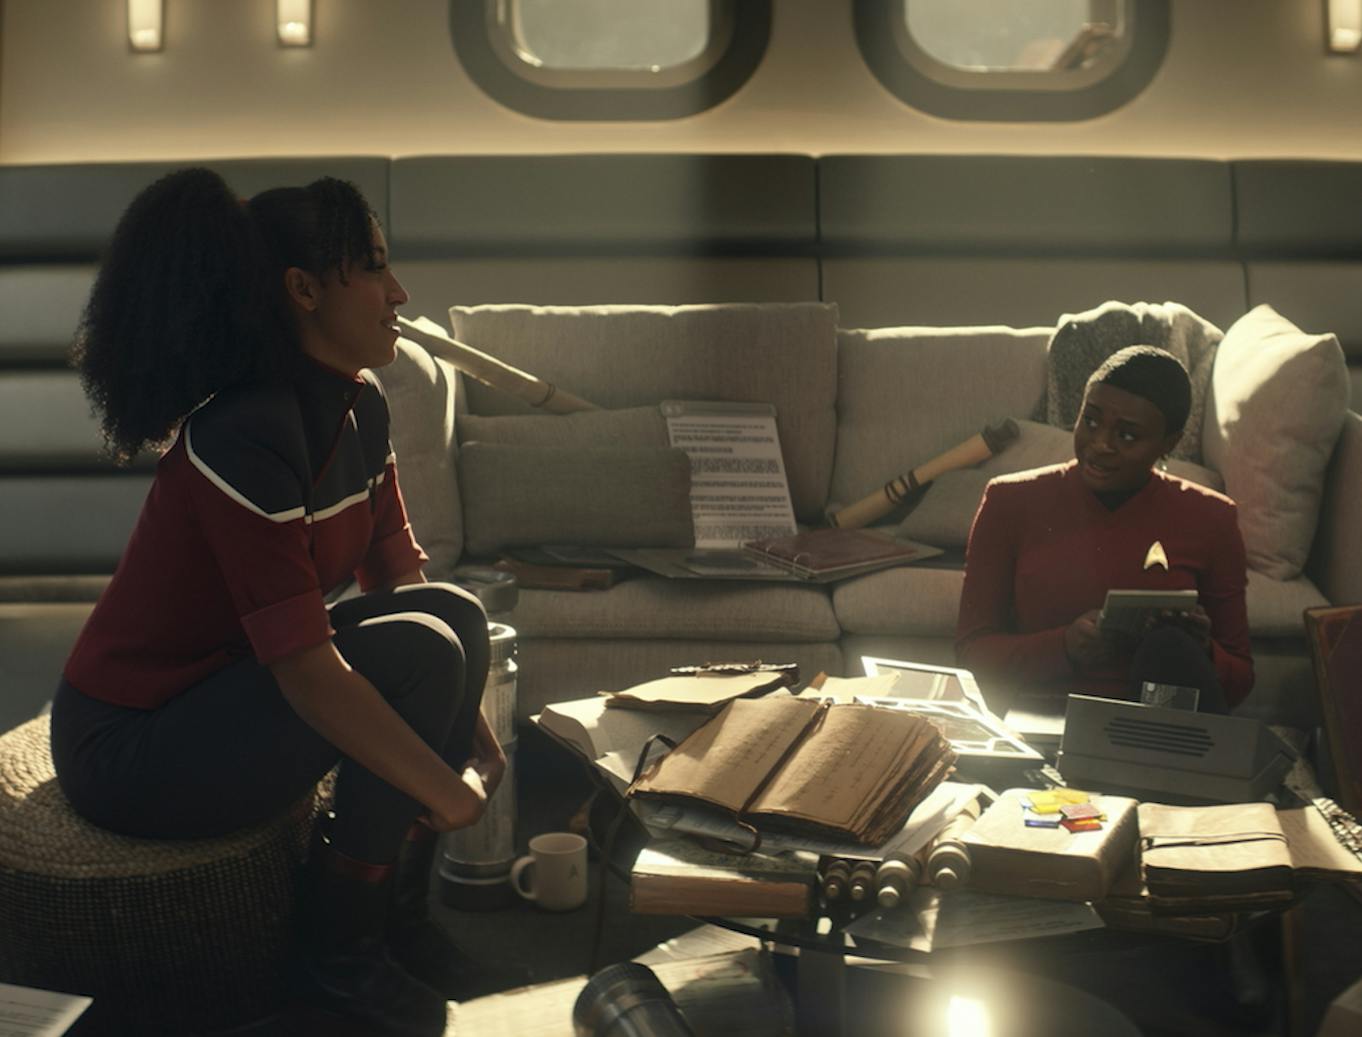 While Uhura holds a PADD in hand, surrounded by her research, Mariner watches over admiring her idol in 'Those Old Scientists'